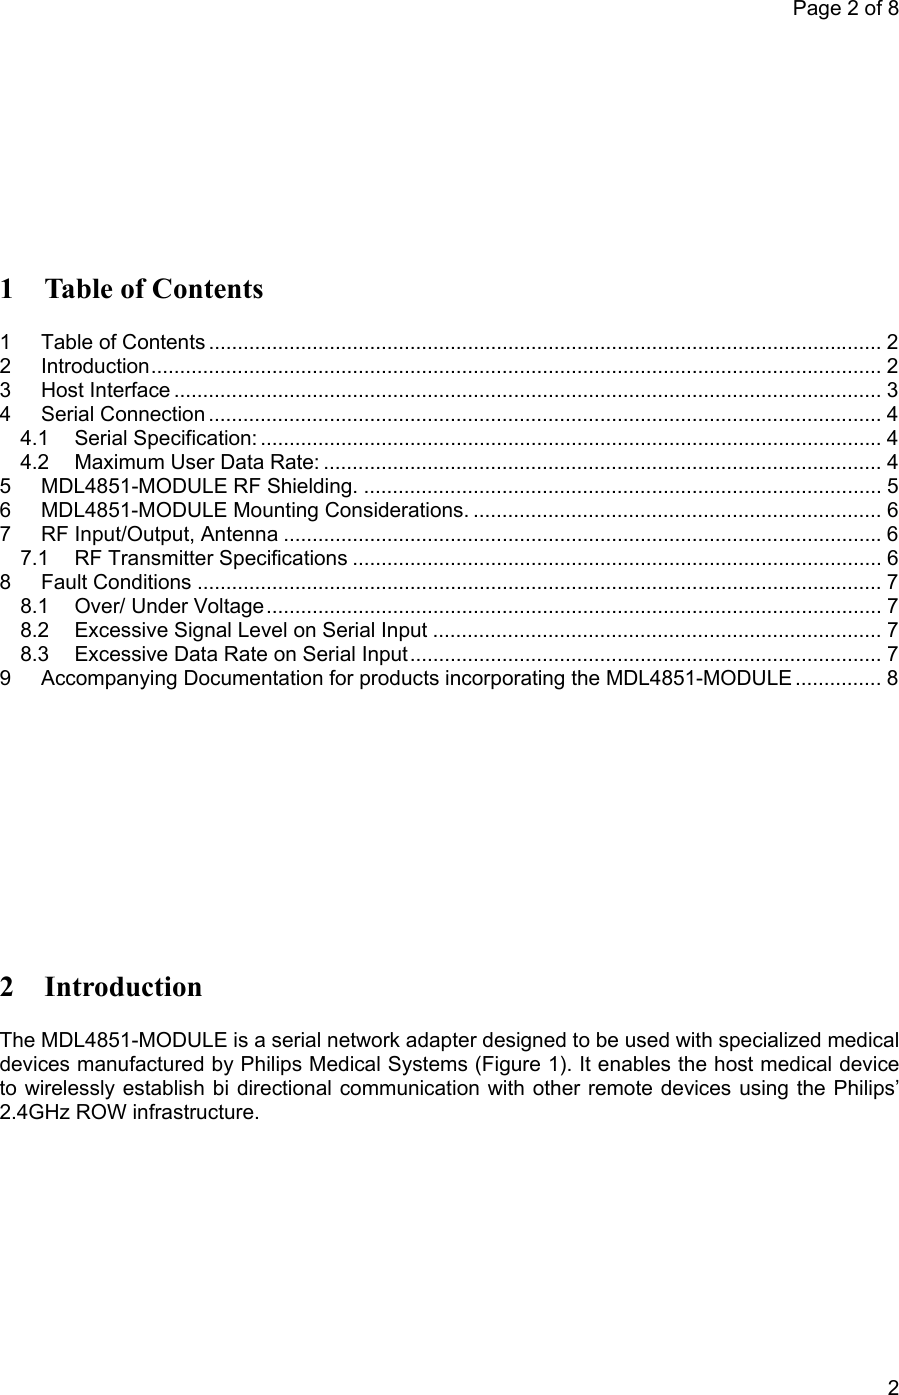 Page 2 of 8            2 1 Table of Contents 1 Table of Contents ..................................................................................................................... 2 2 Introduction............................................................................................................................... 2 3 Host Interface ........................................................................................................................... 3 4 Serial Connection ..................................................................................................................... 4 4.1 Serial Specification: ............................................................................................................ 4 4.2 Maximum User Data Rate: ................................................................................................. 4 5 MDL4851-MODULE RF Shielding. .......................................................................................... 5 6 MDL4851-MODULE Mounting Considerations. ....................................................................... 6 7 RF Input/Output, Antenna ........................................................................................................6 7.1 RF Transmitter Specifications ............................................................................................ 6 8 Fault Conditions ....................................................................................................................... 7 8.1 Over/ Under Voltage........................................................................................................... 7 8.2 Excessive Signal Level on Serial Input .............................................................................. 7 8.3 Excessive Data Rate on Serial Input.................................................................................. 7 9 Accompanying Documentation for products incorporating the MDL4851-MODULE ............... 8        2 Introduction The MDL4851-MODULE is a serial network adapter designed to be used with specialized medical devices manufactured by Philips Medical Systems (Figure 1). It enables the host medical device to wirelessly establish bi directional communication with other remote devices using the Philips’ 2.4GHz ROW infrastructure.   